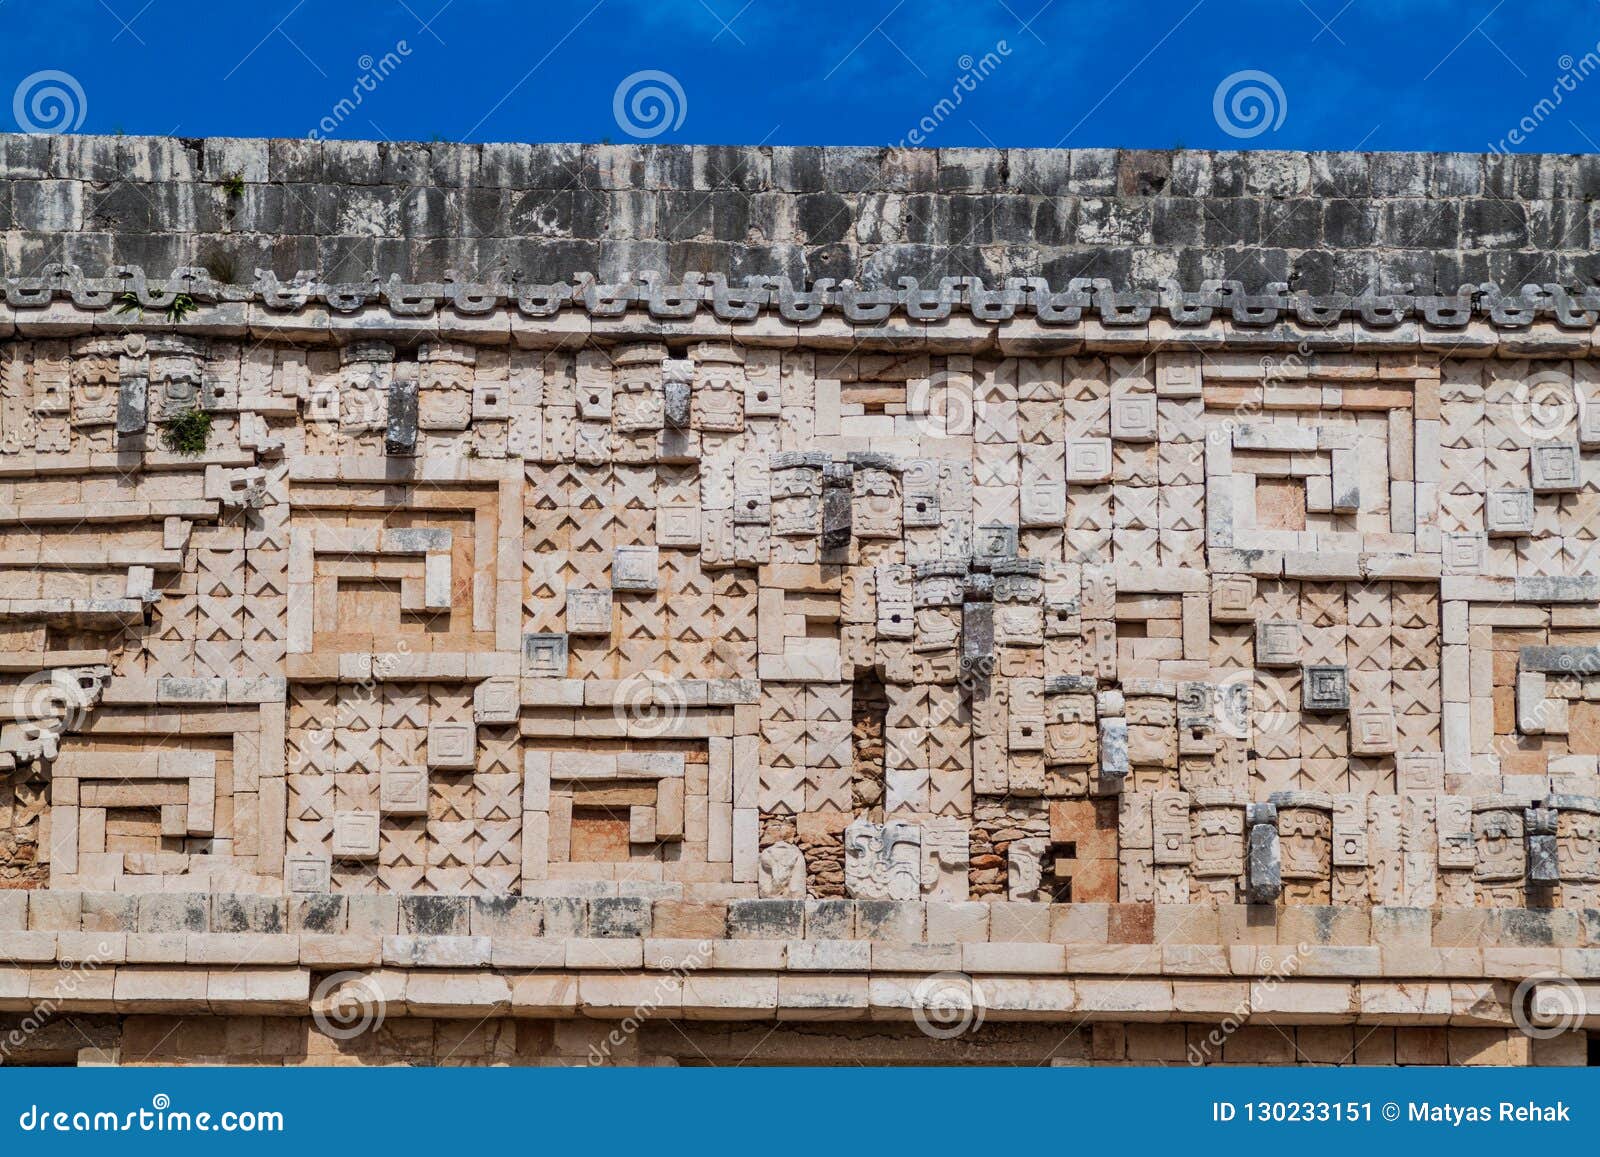 detil of the stonework at the palacio del gobernador governor`s palace building in the ruins of the ancient mayan city